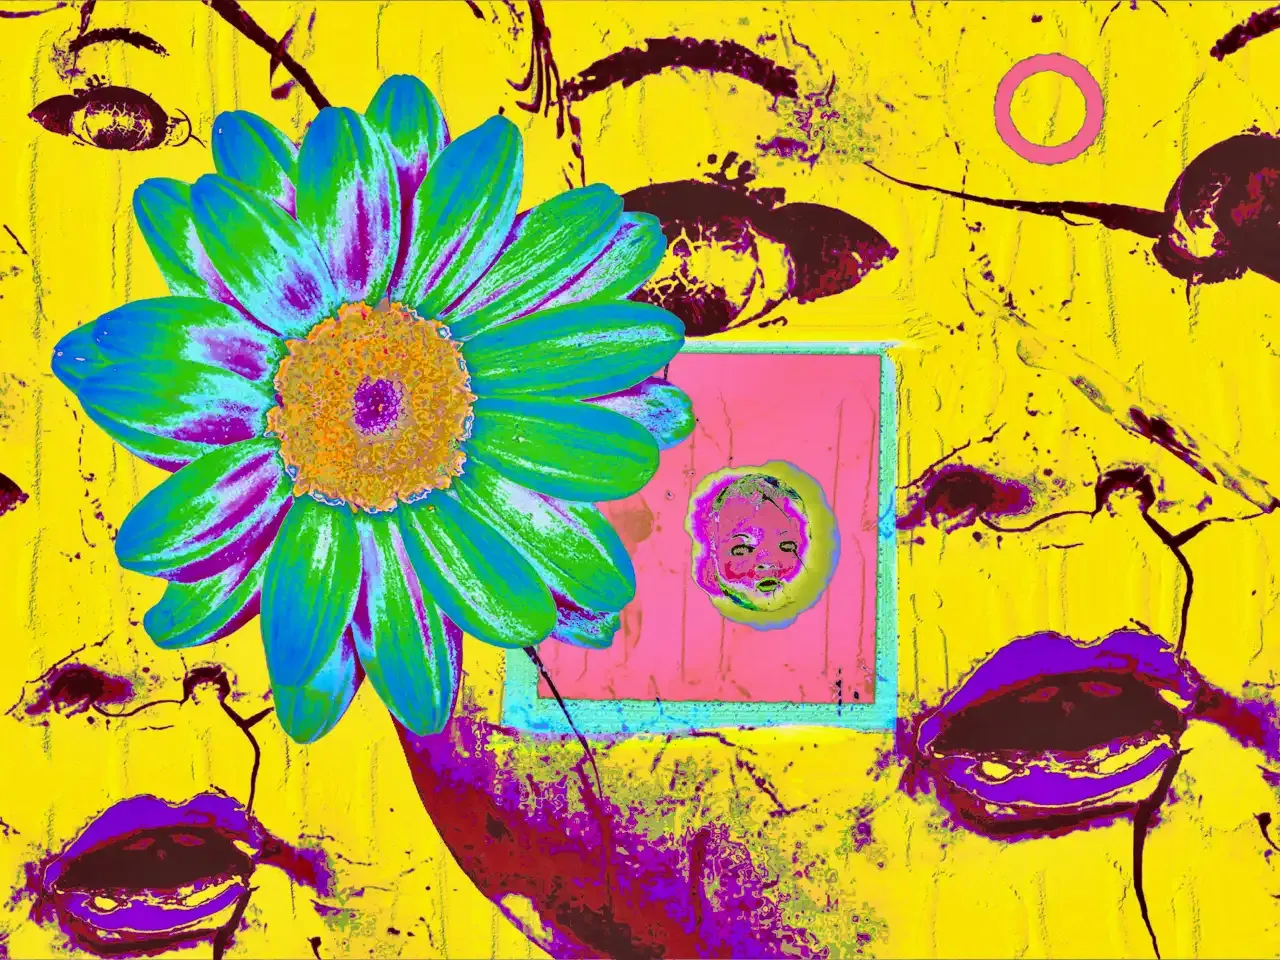 montage of purple doll faces on a painted yellow wall, with a tourquoise and purple flower